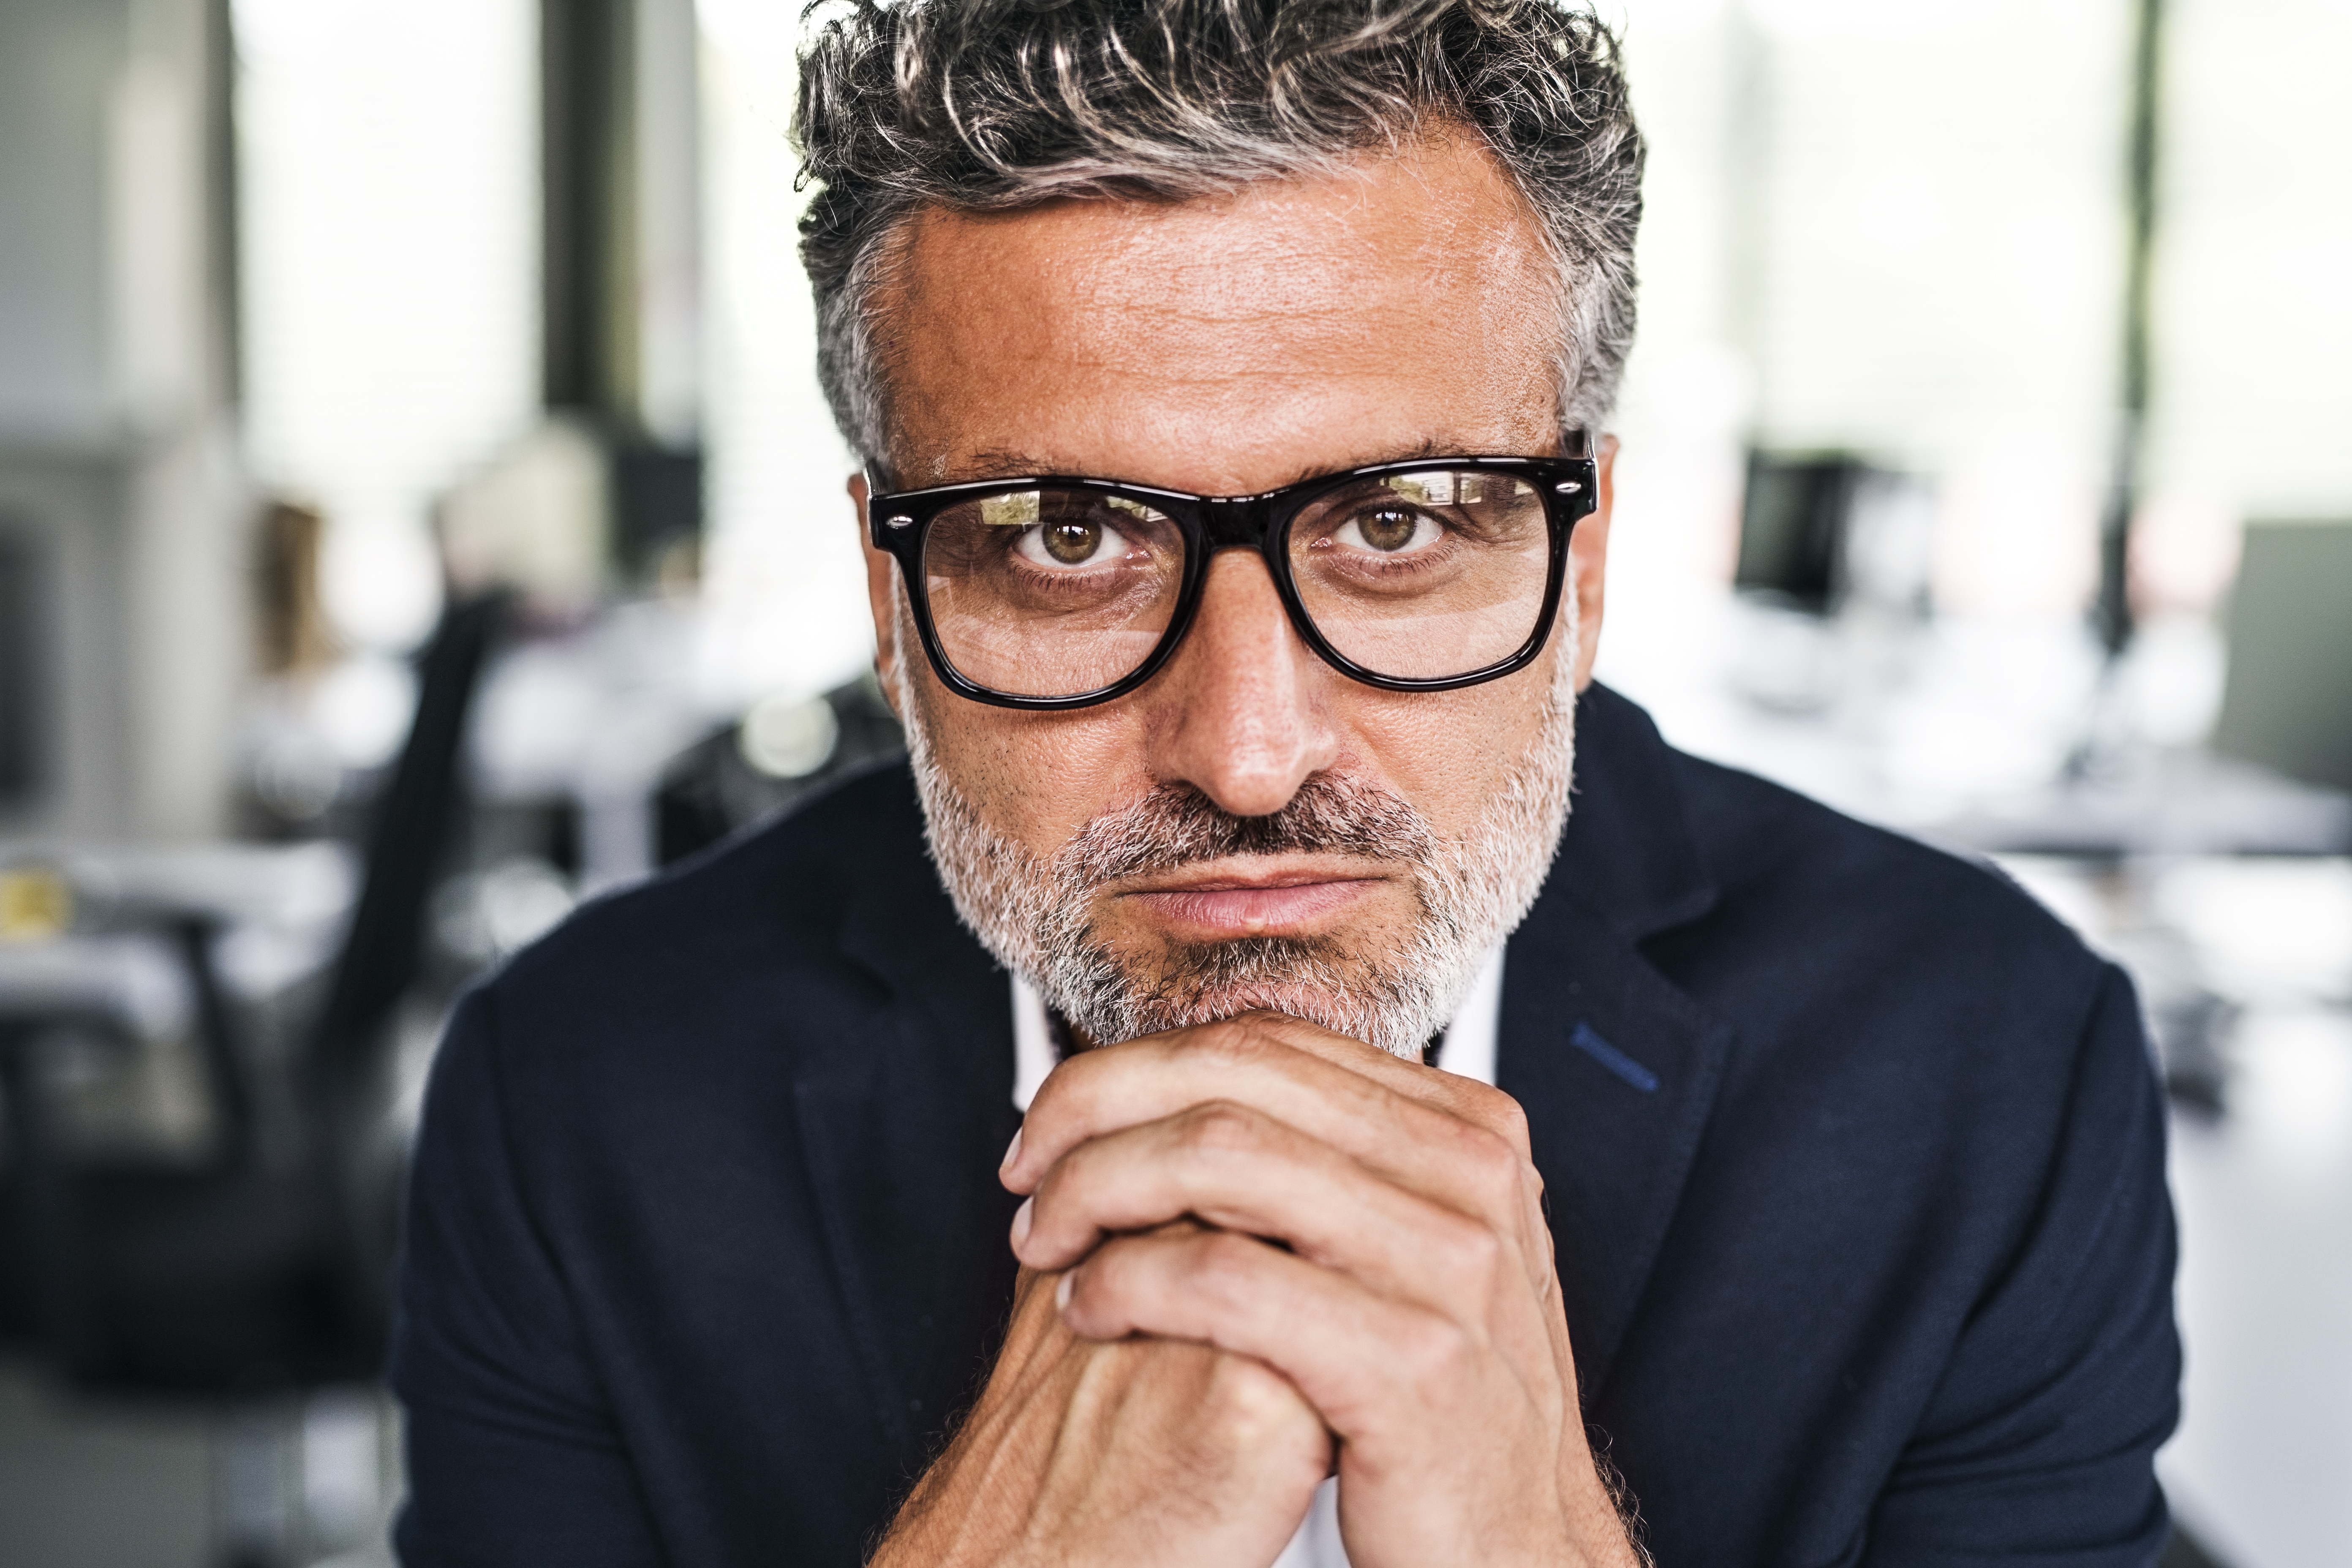 Portrait of serious mature businessman wearing glasses in office | Source: Getty Images